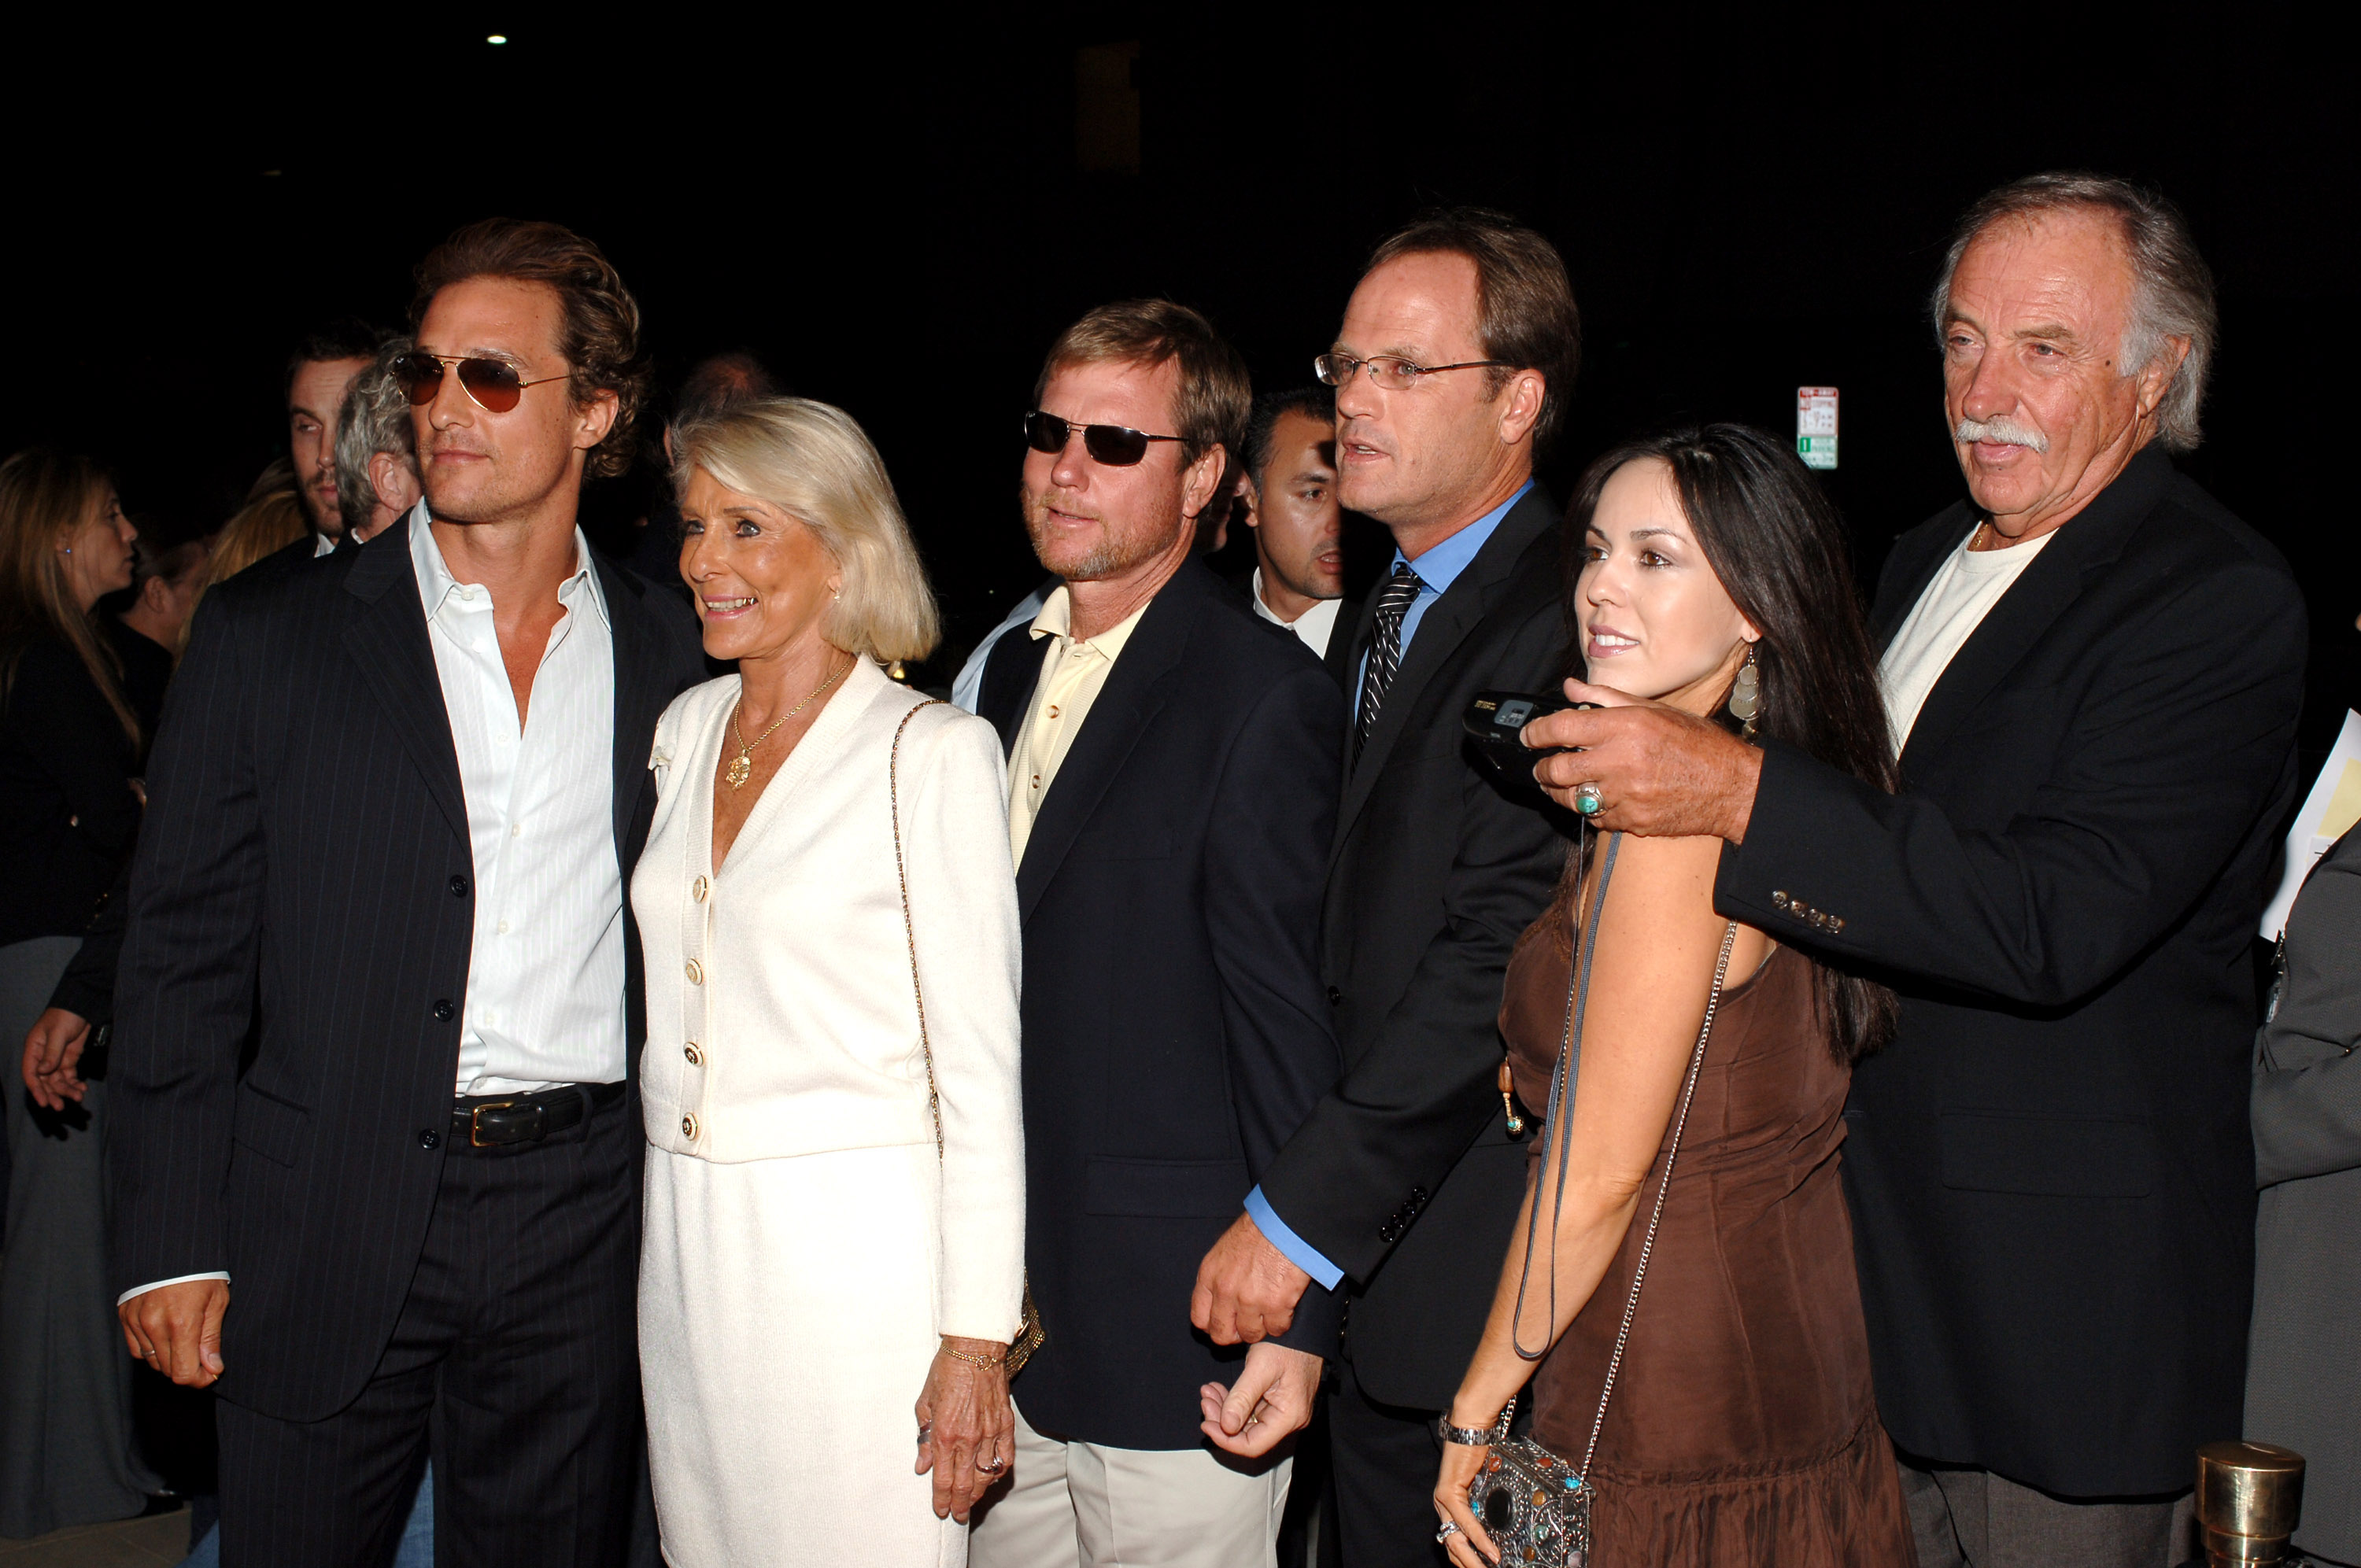 Matthew McConaughey, Kay McCabeat, James McConaughey, and other family members during the "Two for the Money" World Premiere in Los Angeles, California, on September 27, 2005 | Source: Getty Images